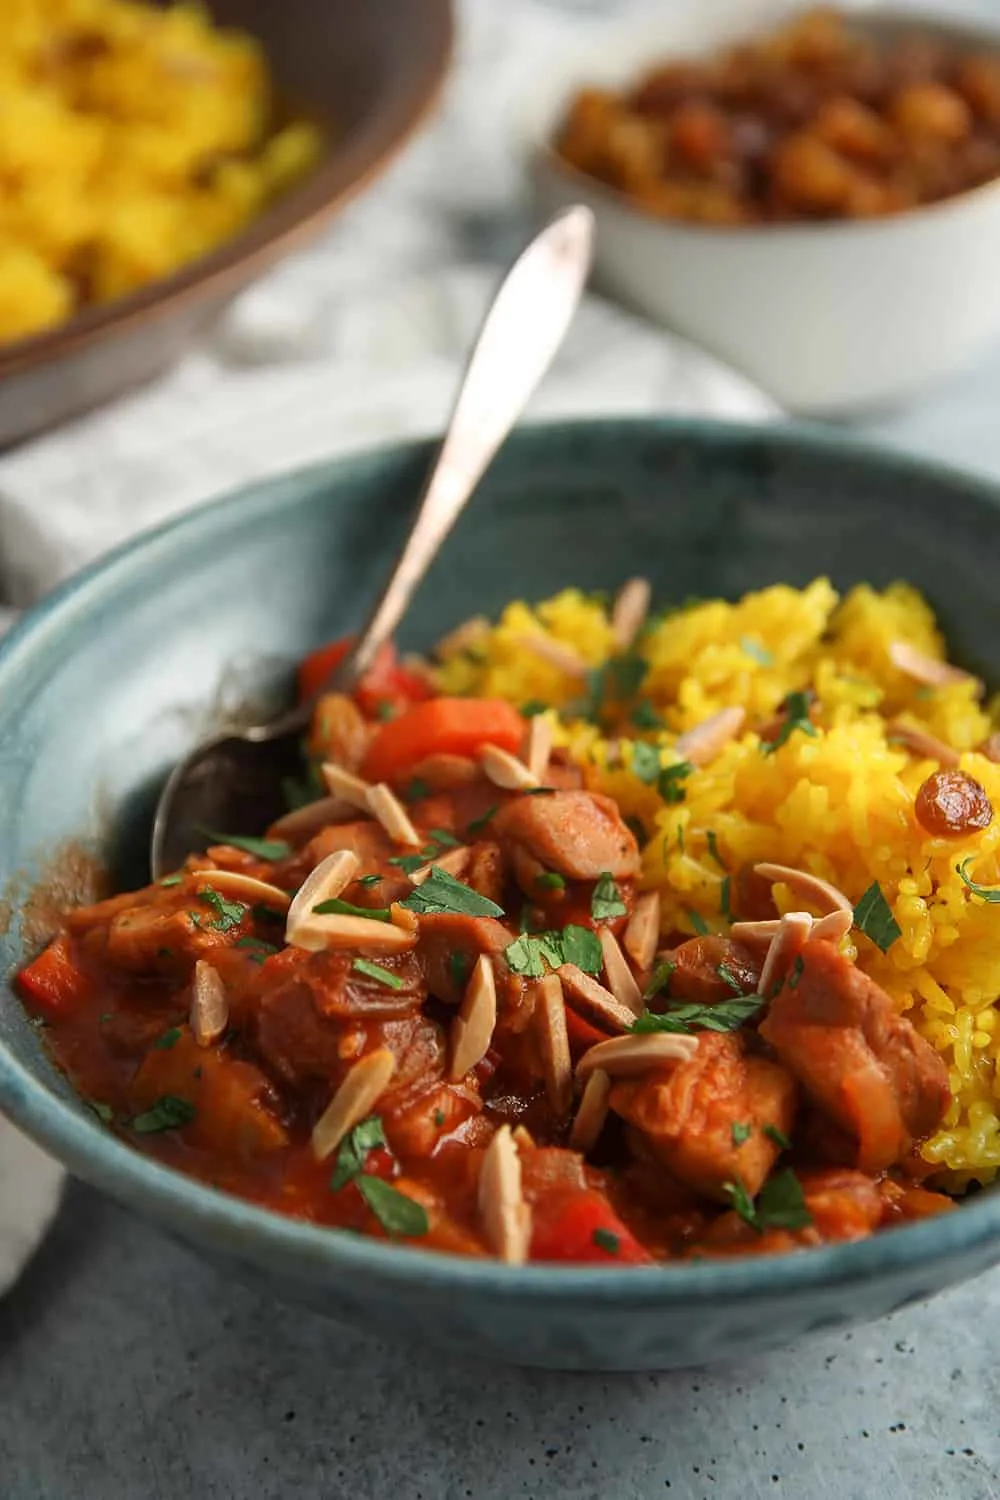 Make Quick Moroccan Chicken Stew on a weeknight or weekend; it is delicious any day!